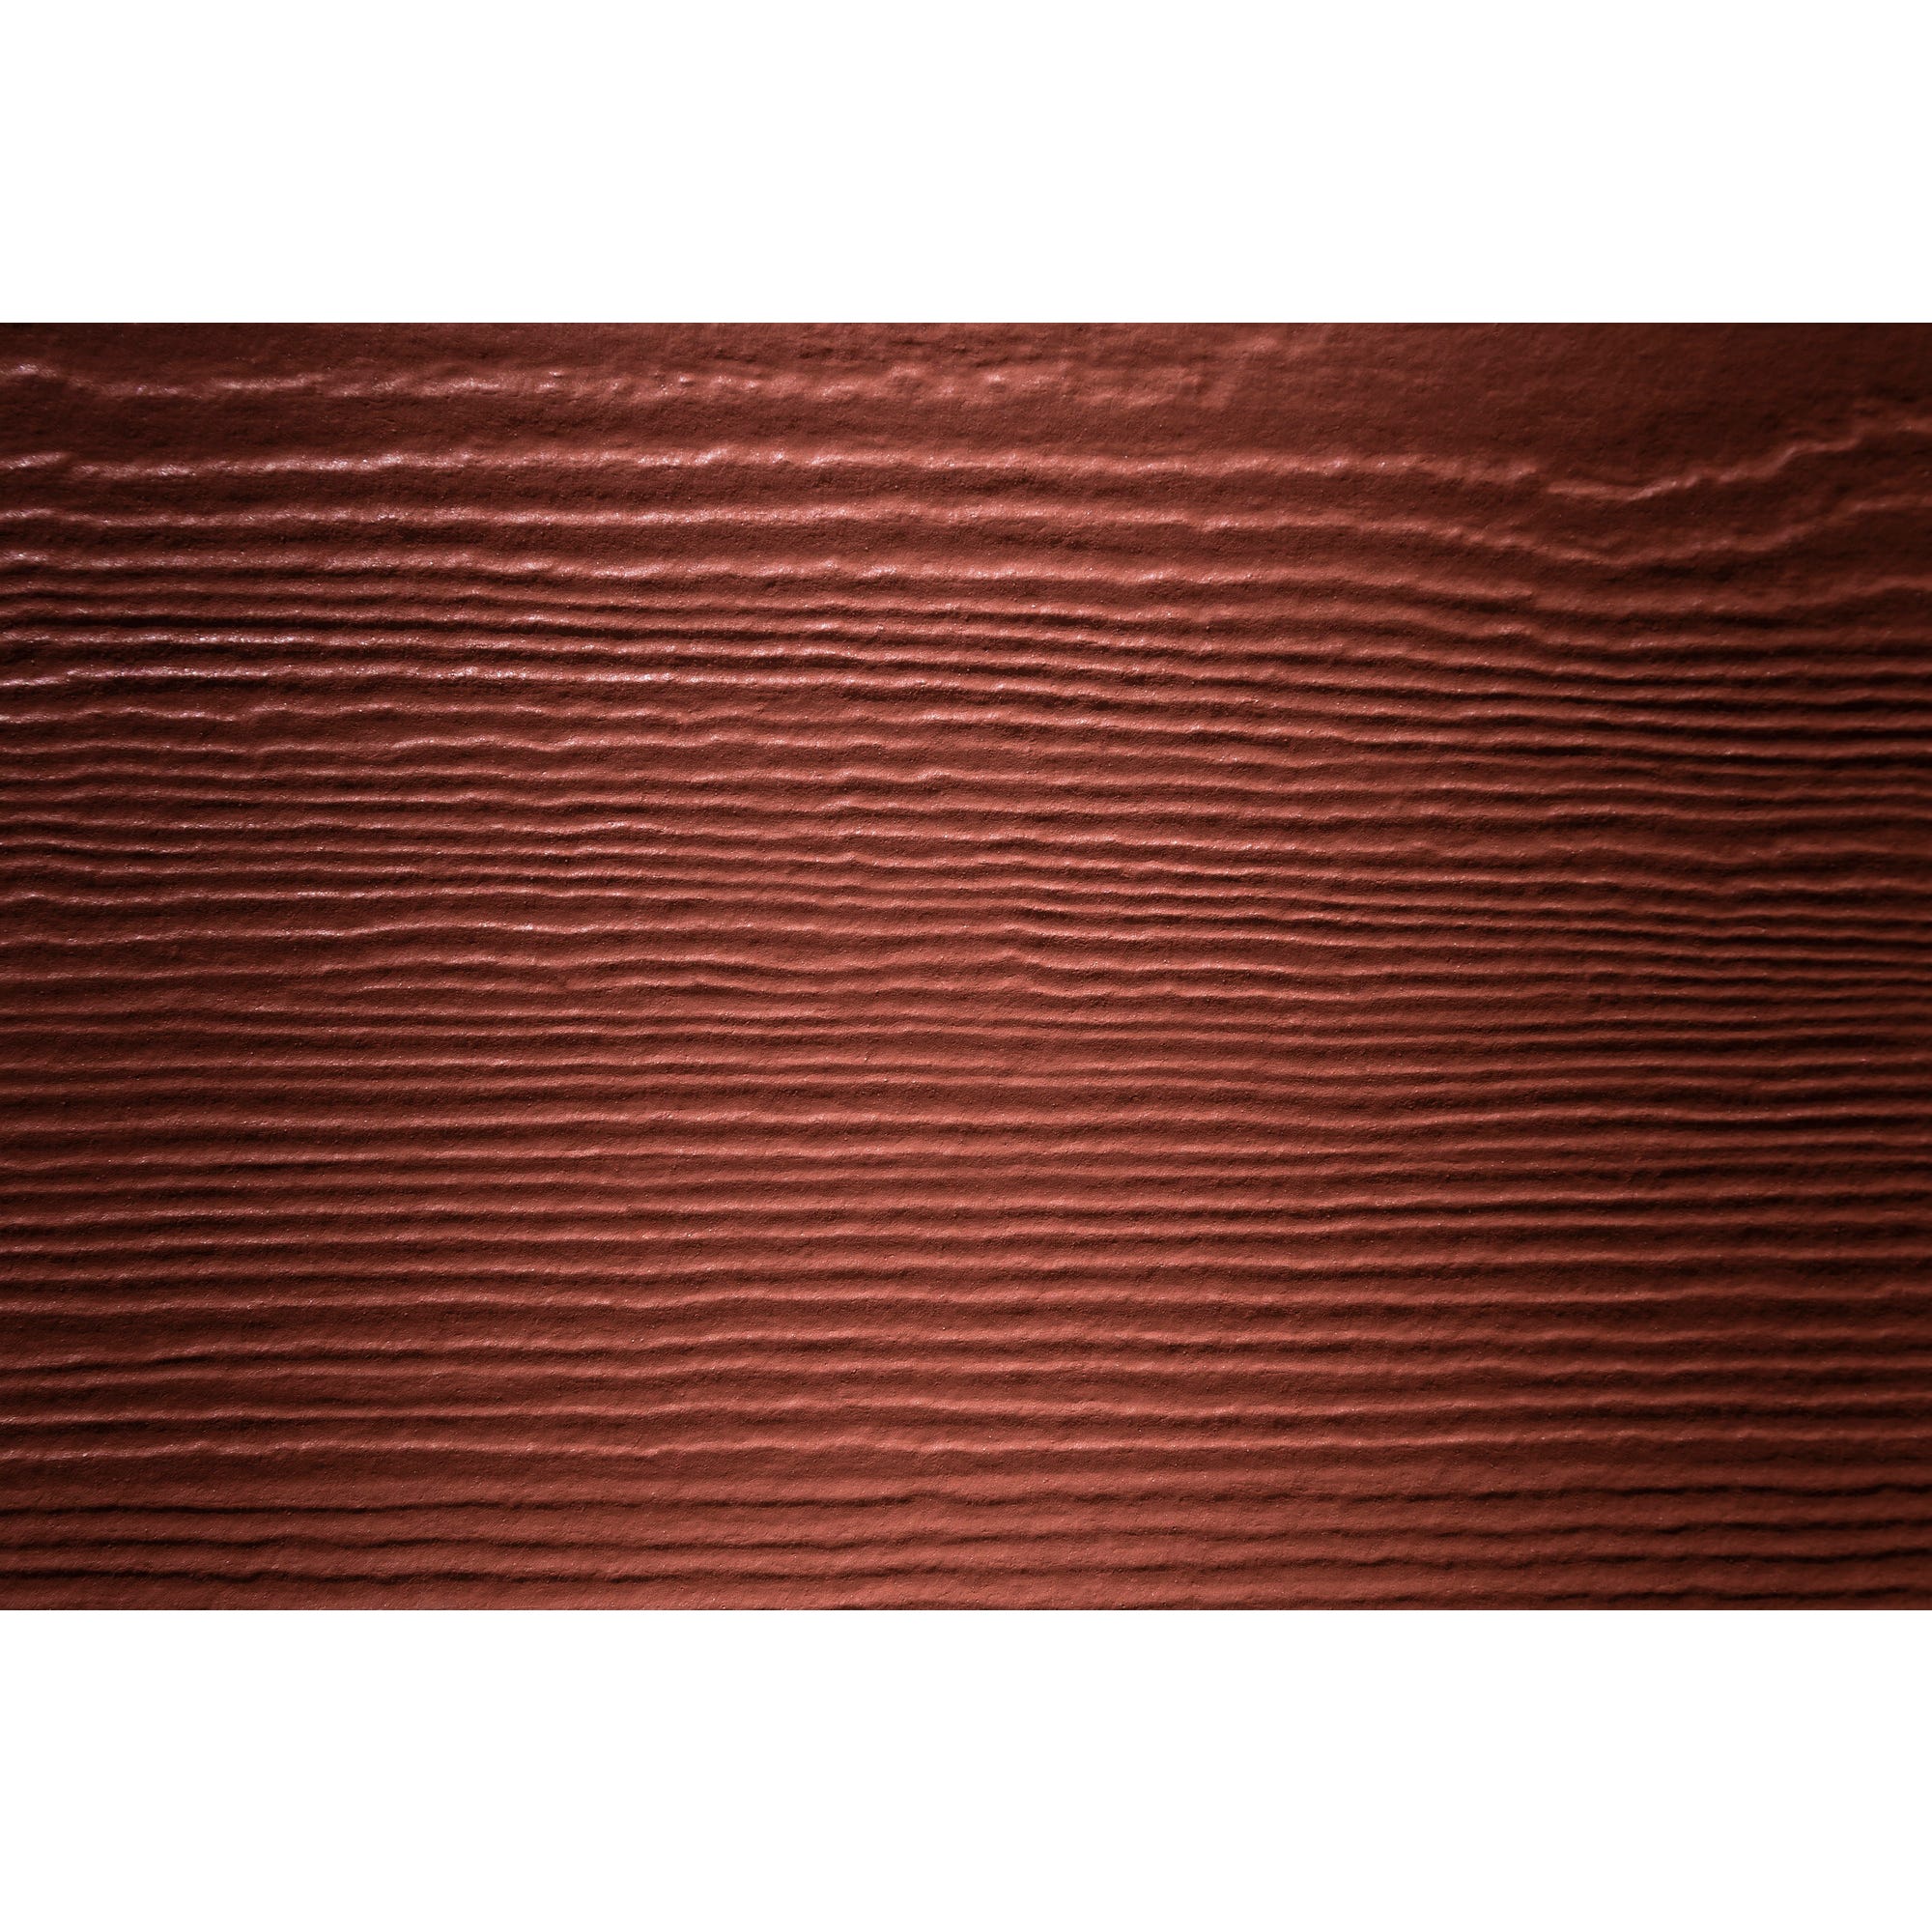 Clin pour bardage rouge traditionnel L.3600 × l.180 × Ep.8 mm HardiePlank Cedar 2